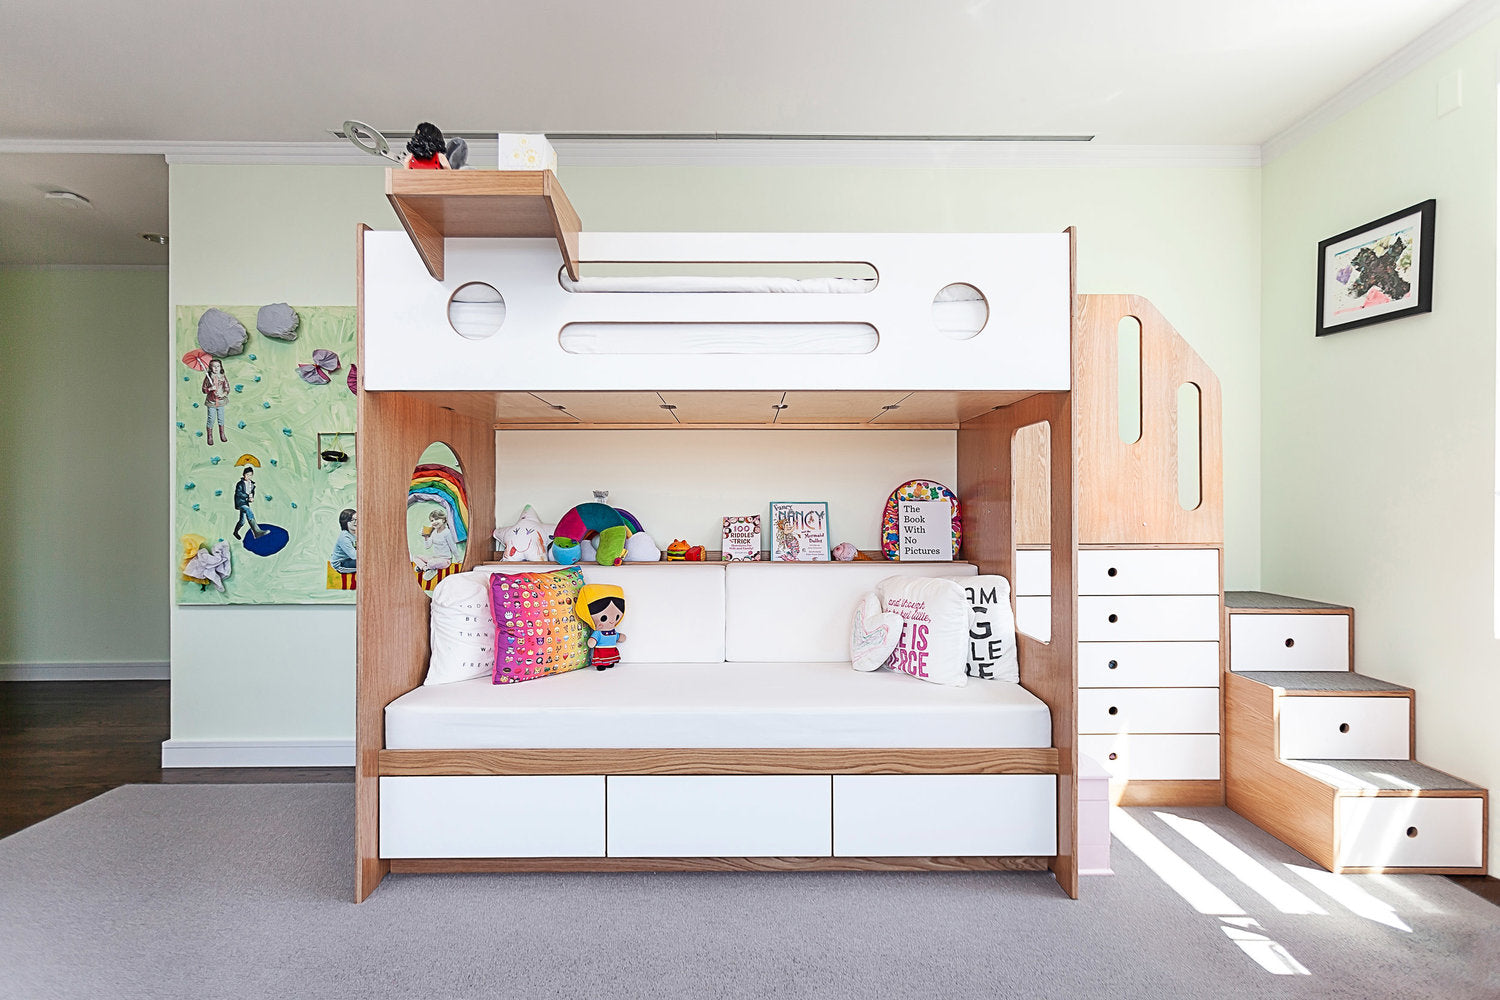 Modern kids’ room with bunk bed, storage, and colorful decor.